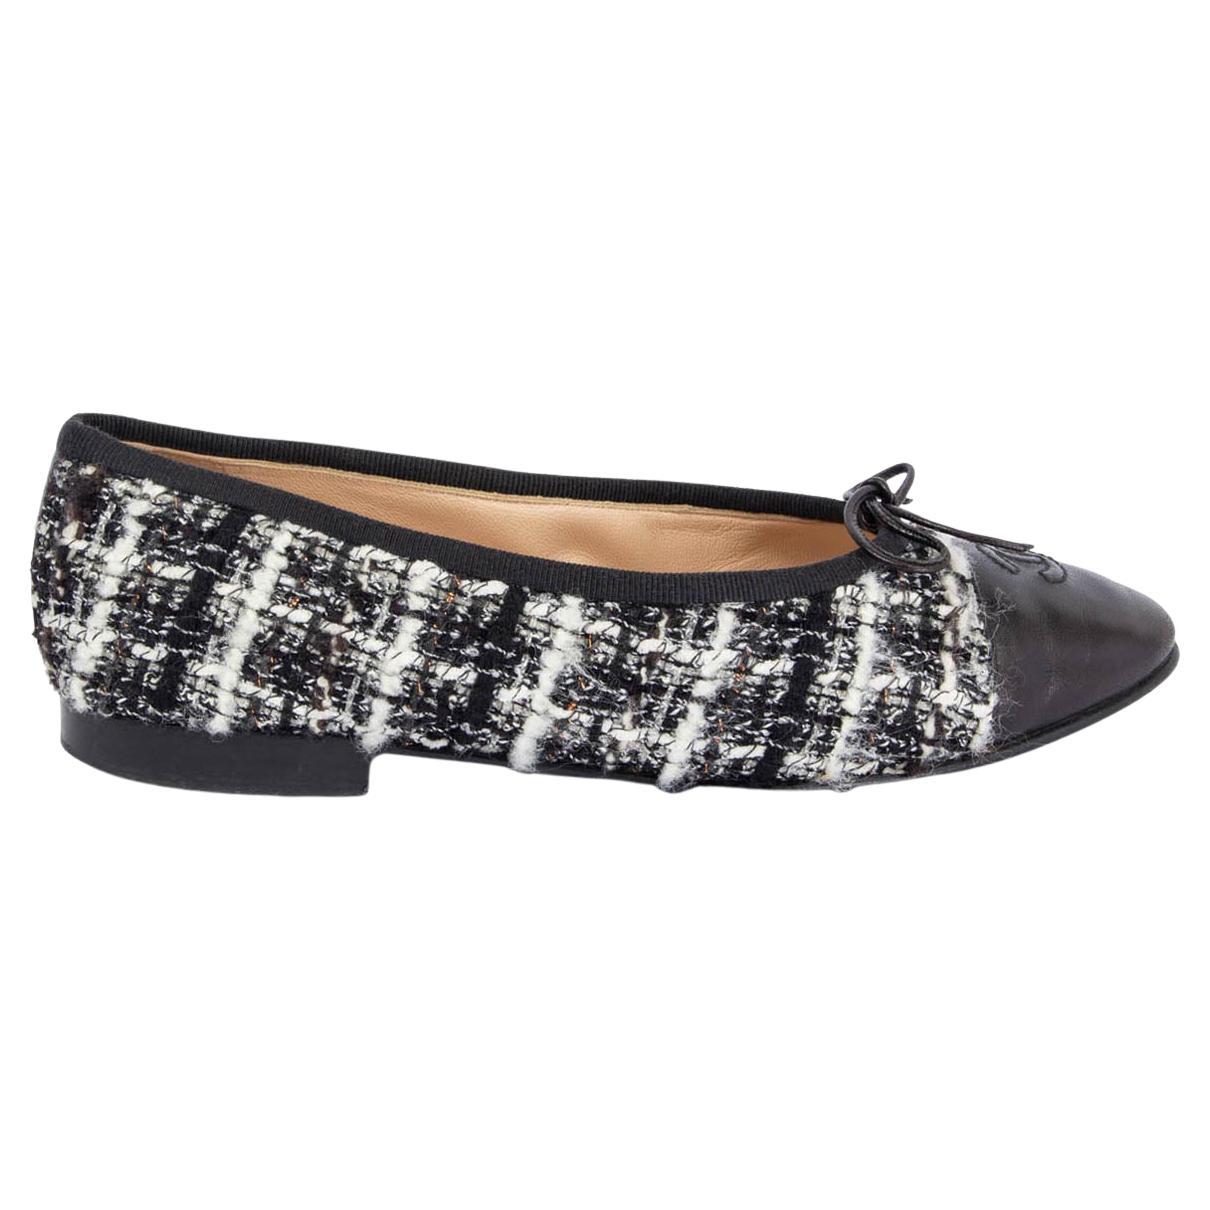 Chanel Black & White Tweed Ballet Flats Shoes 36